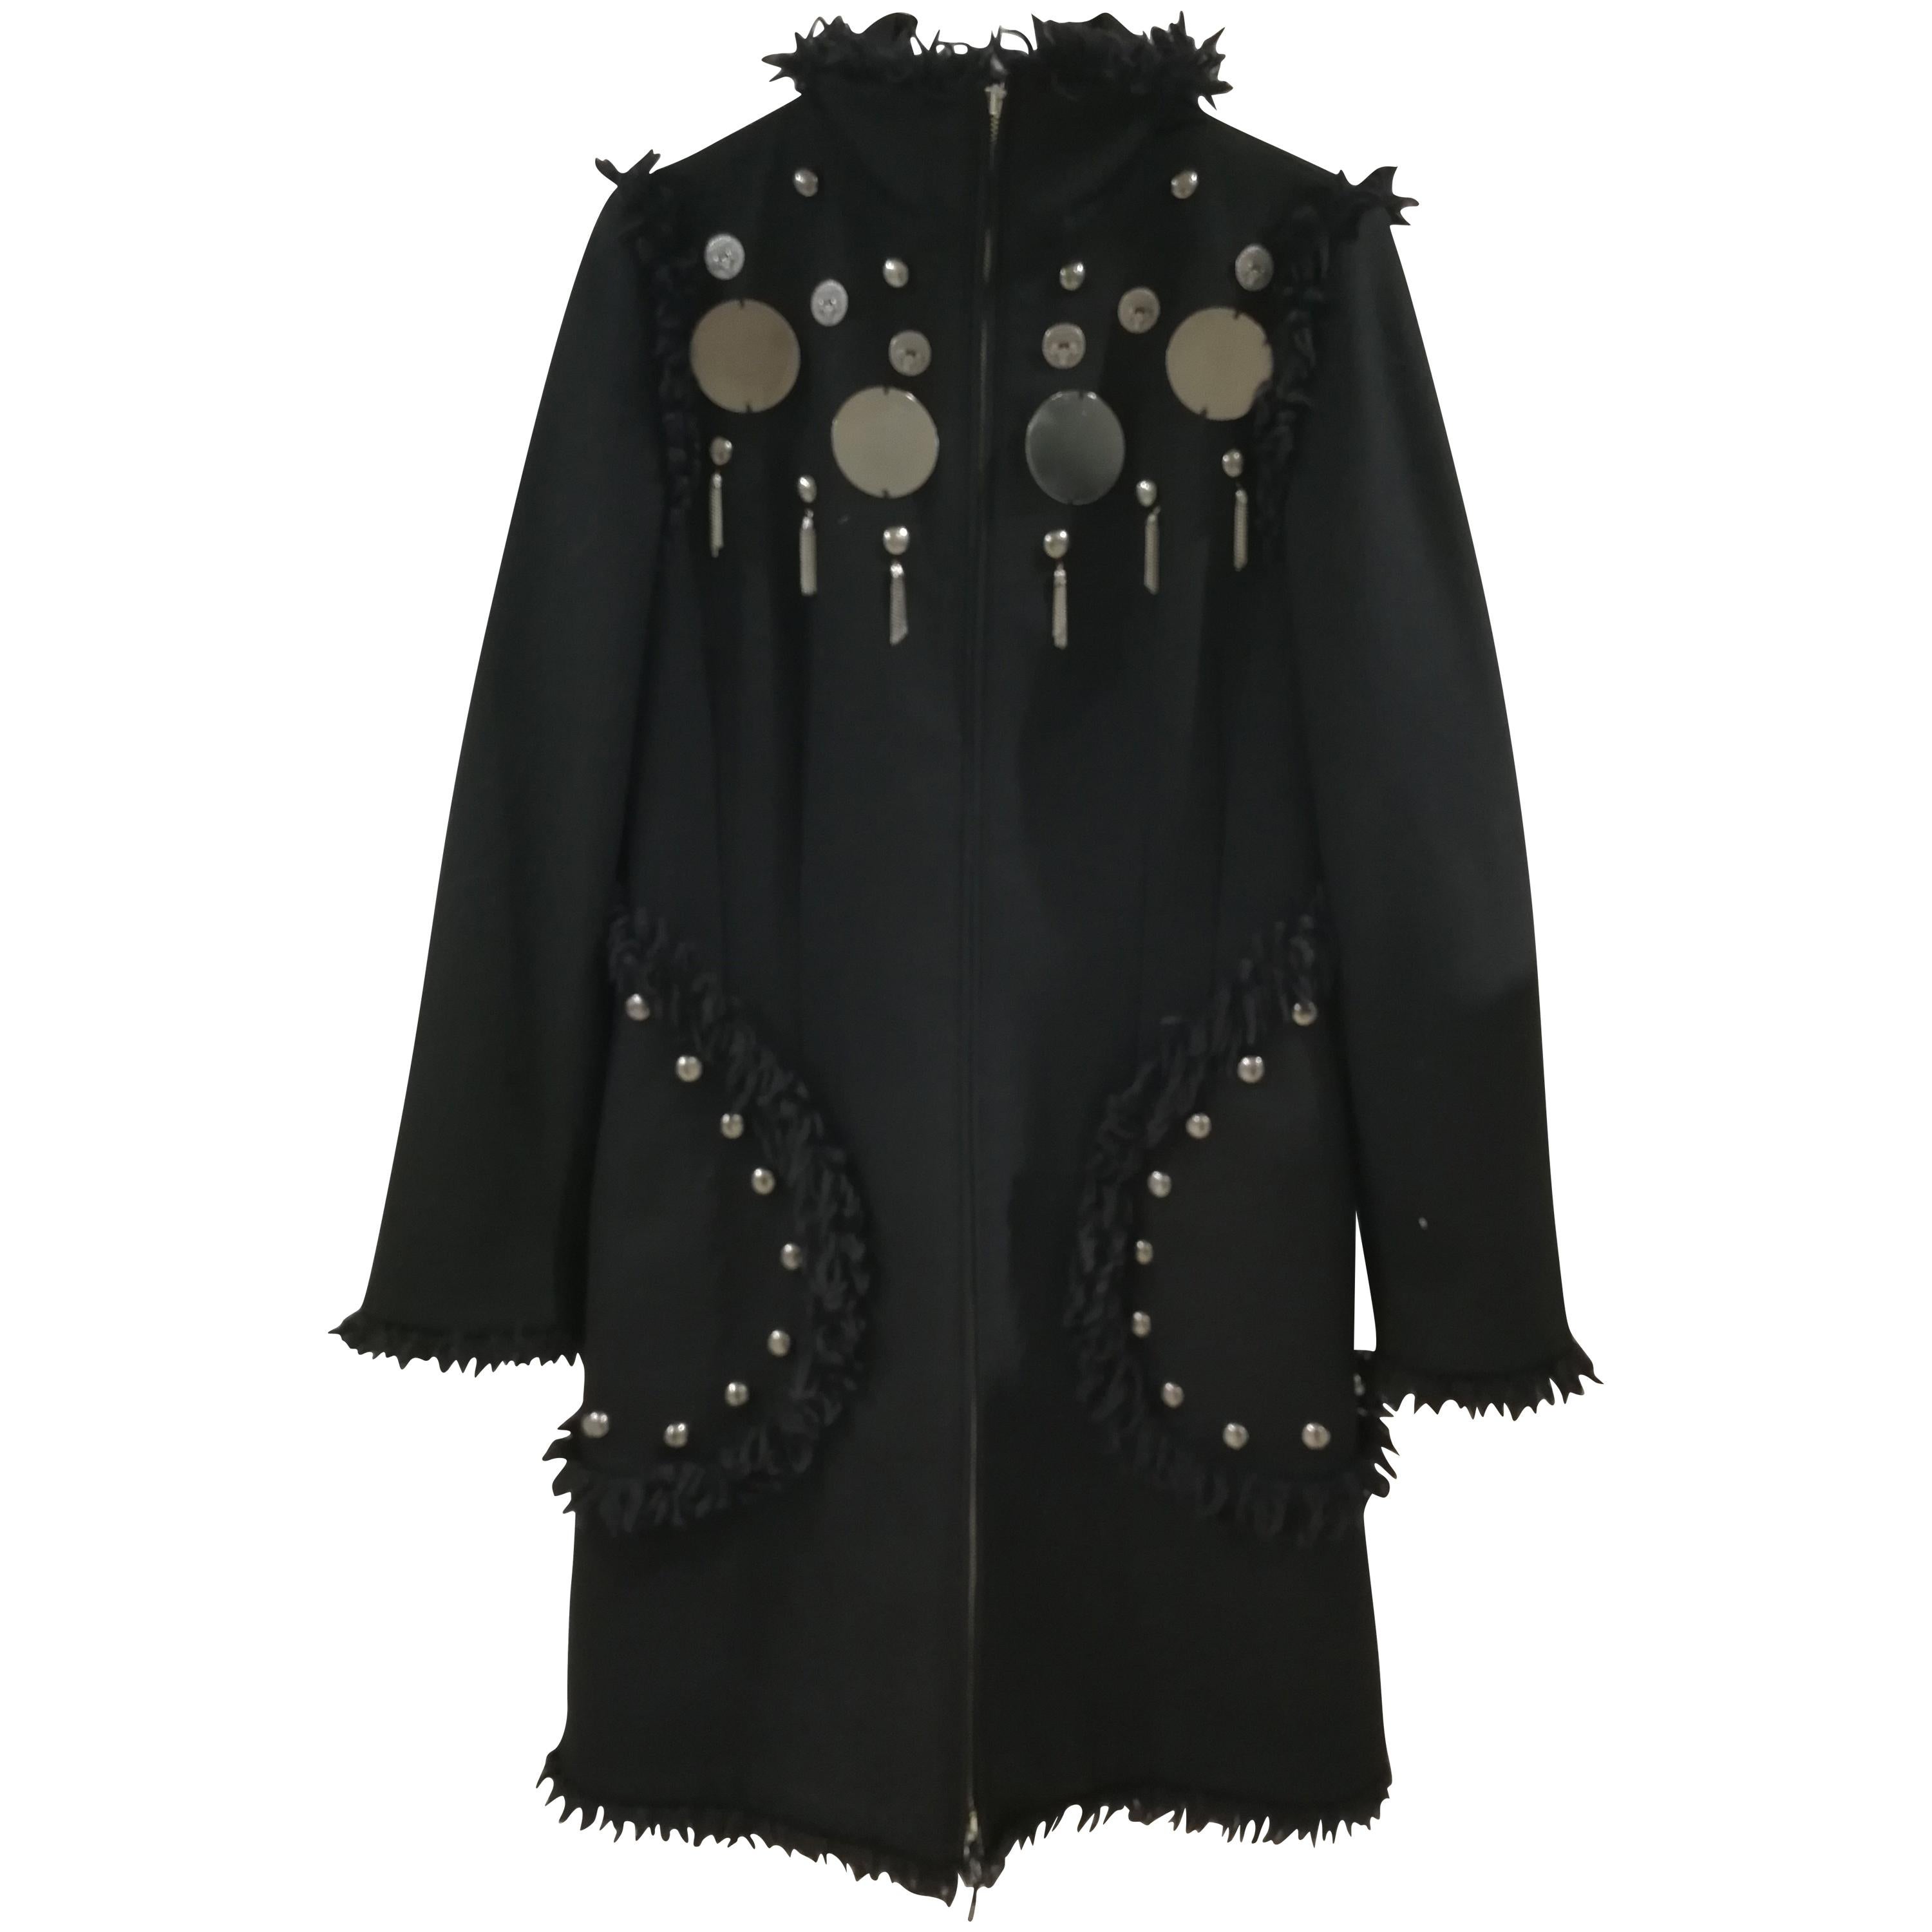 Moschino Jeans Silver tone Studs Black Wool Coat